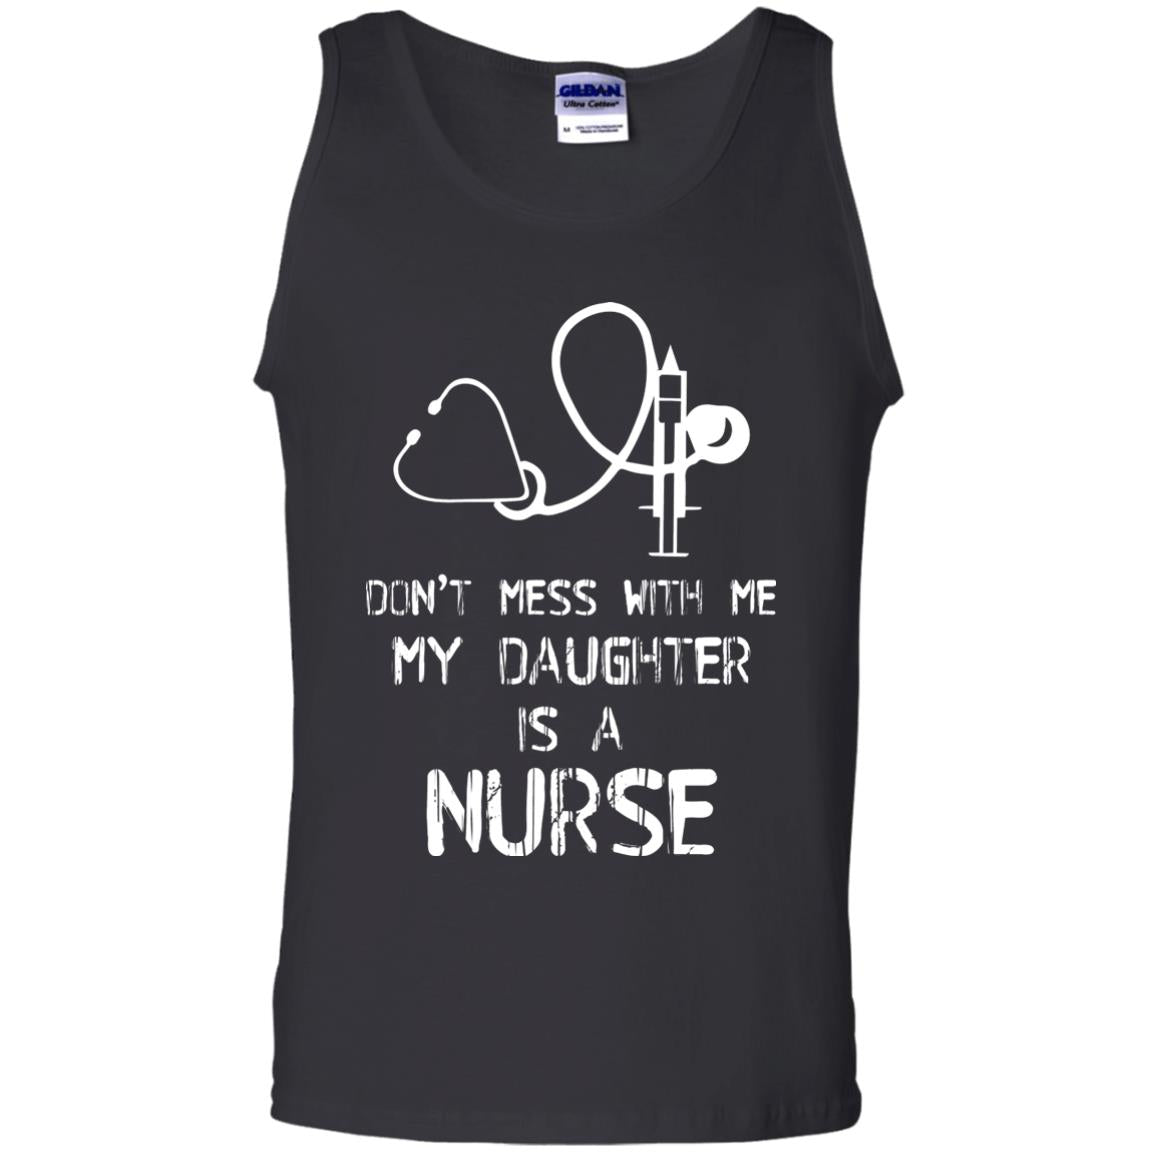 Don’t Mess With Me My Daughter Is A Nurse Funny Nurse Shirt For Parents